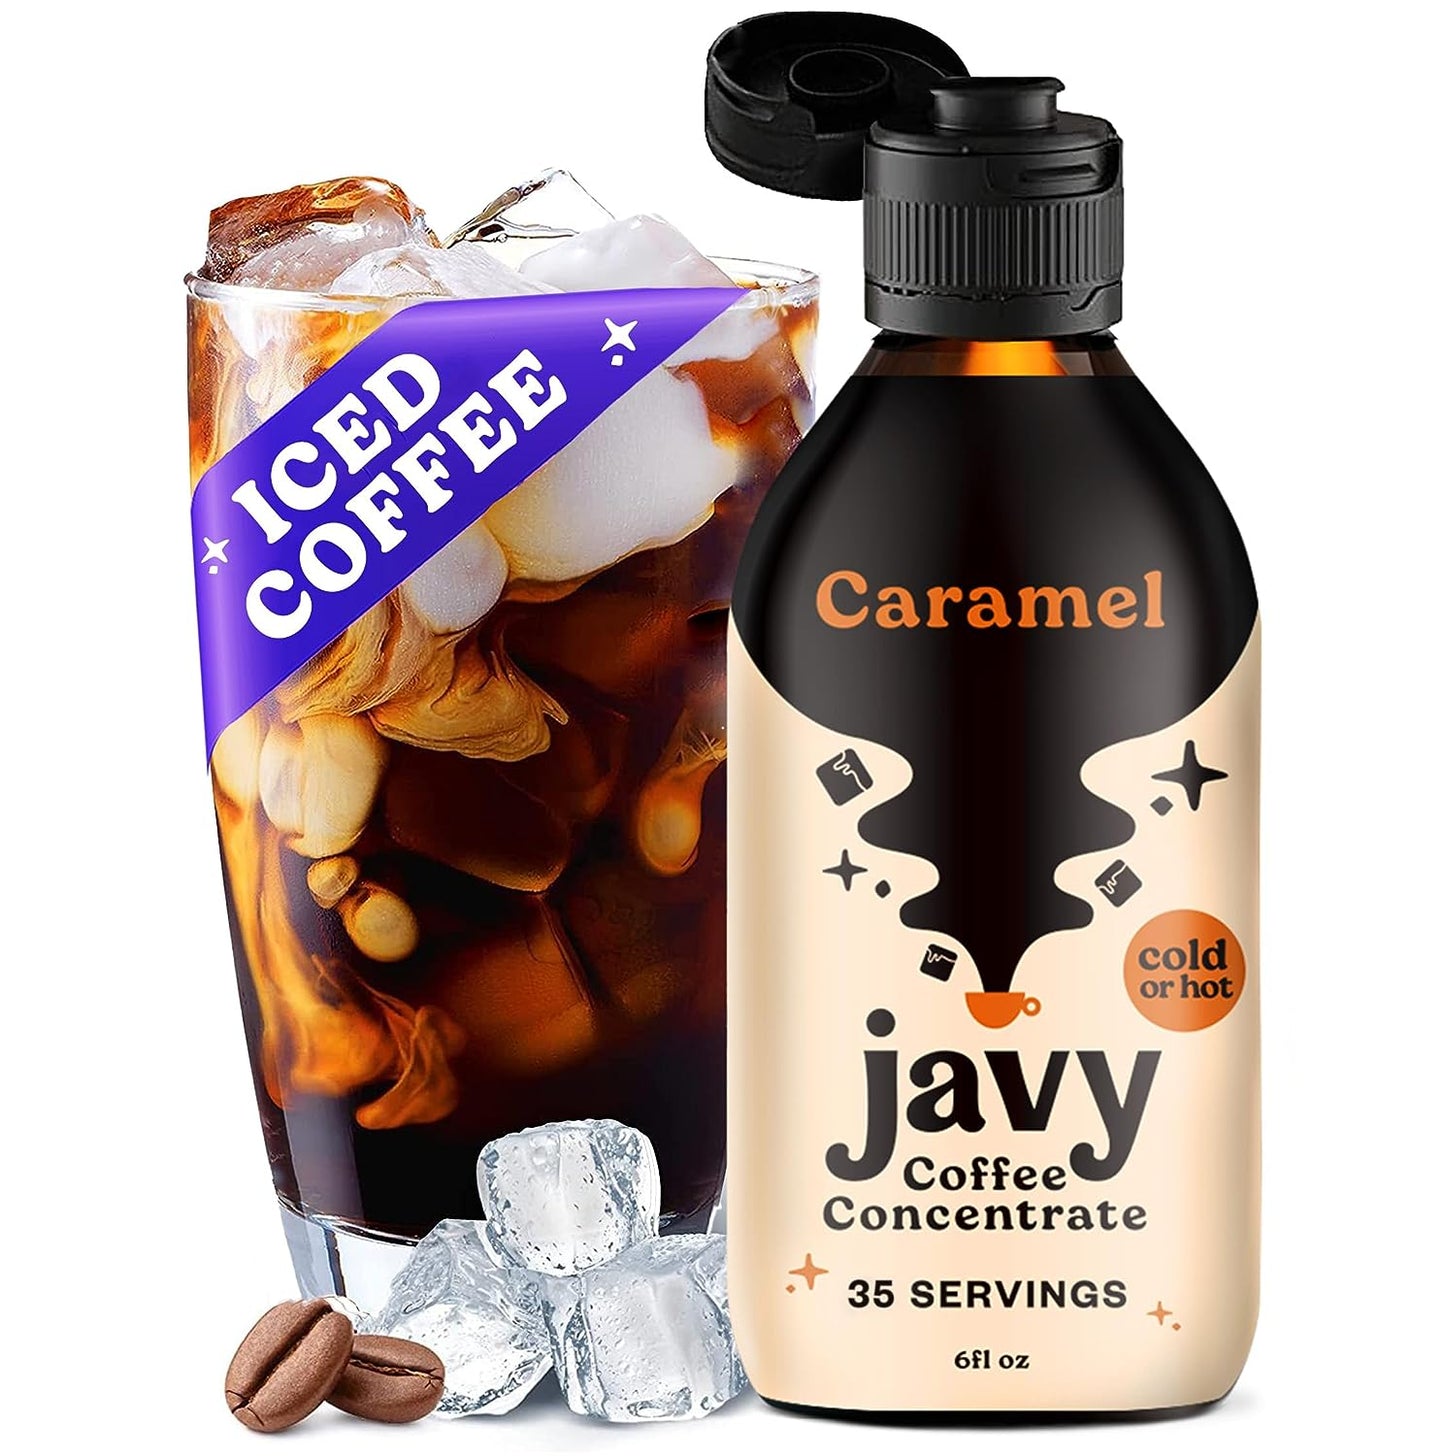 Caramel - Coffee Concentrate